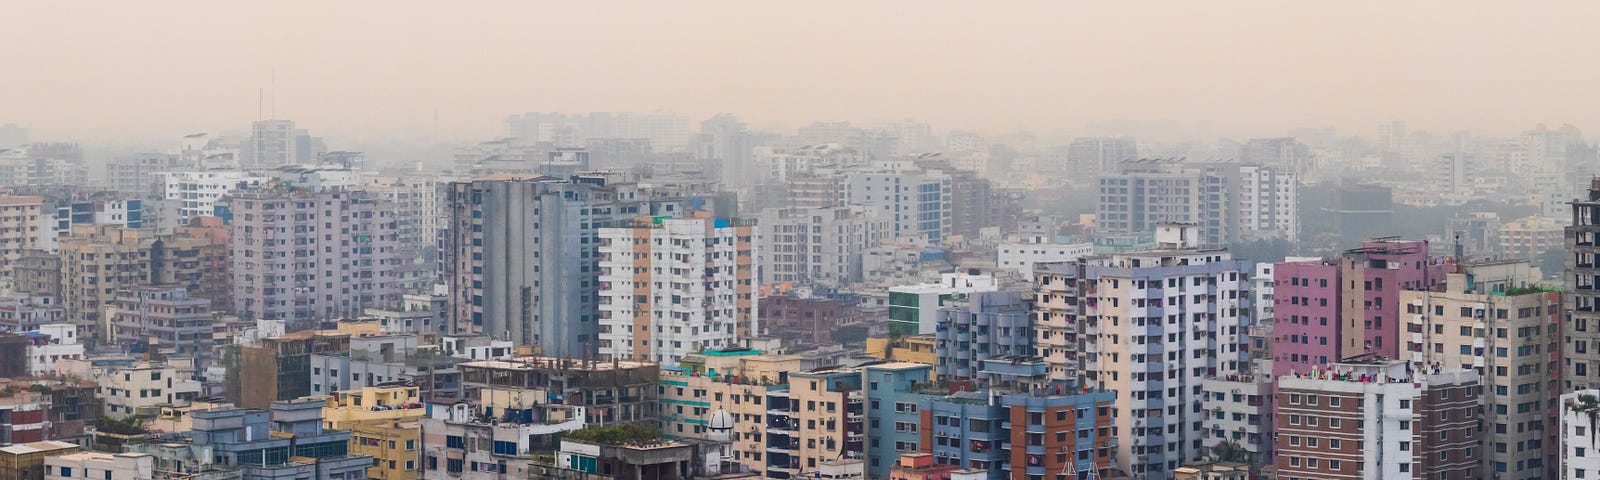 Landscape image of the city of Dhaka, Bangladesh, featuring high rise buildings and a hazy sky.